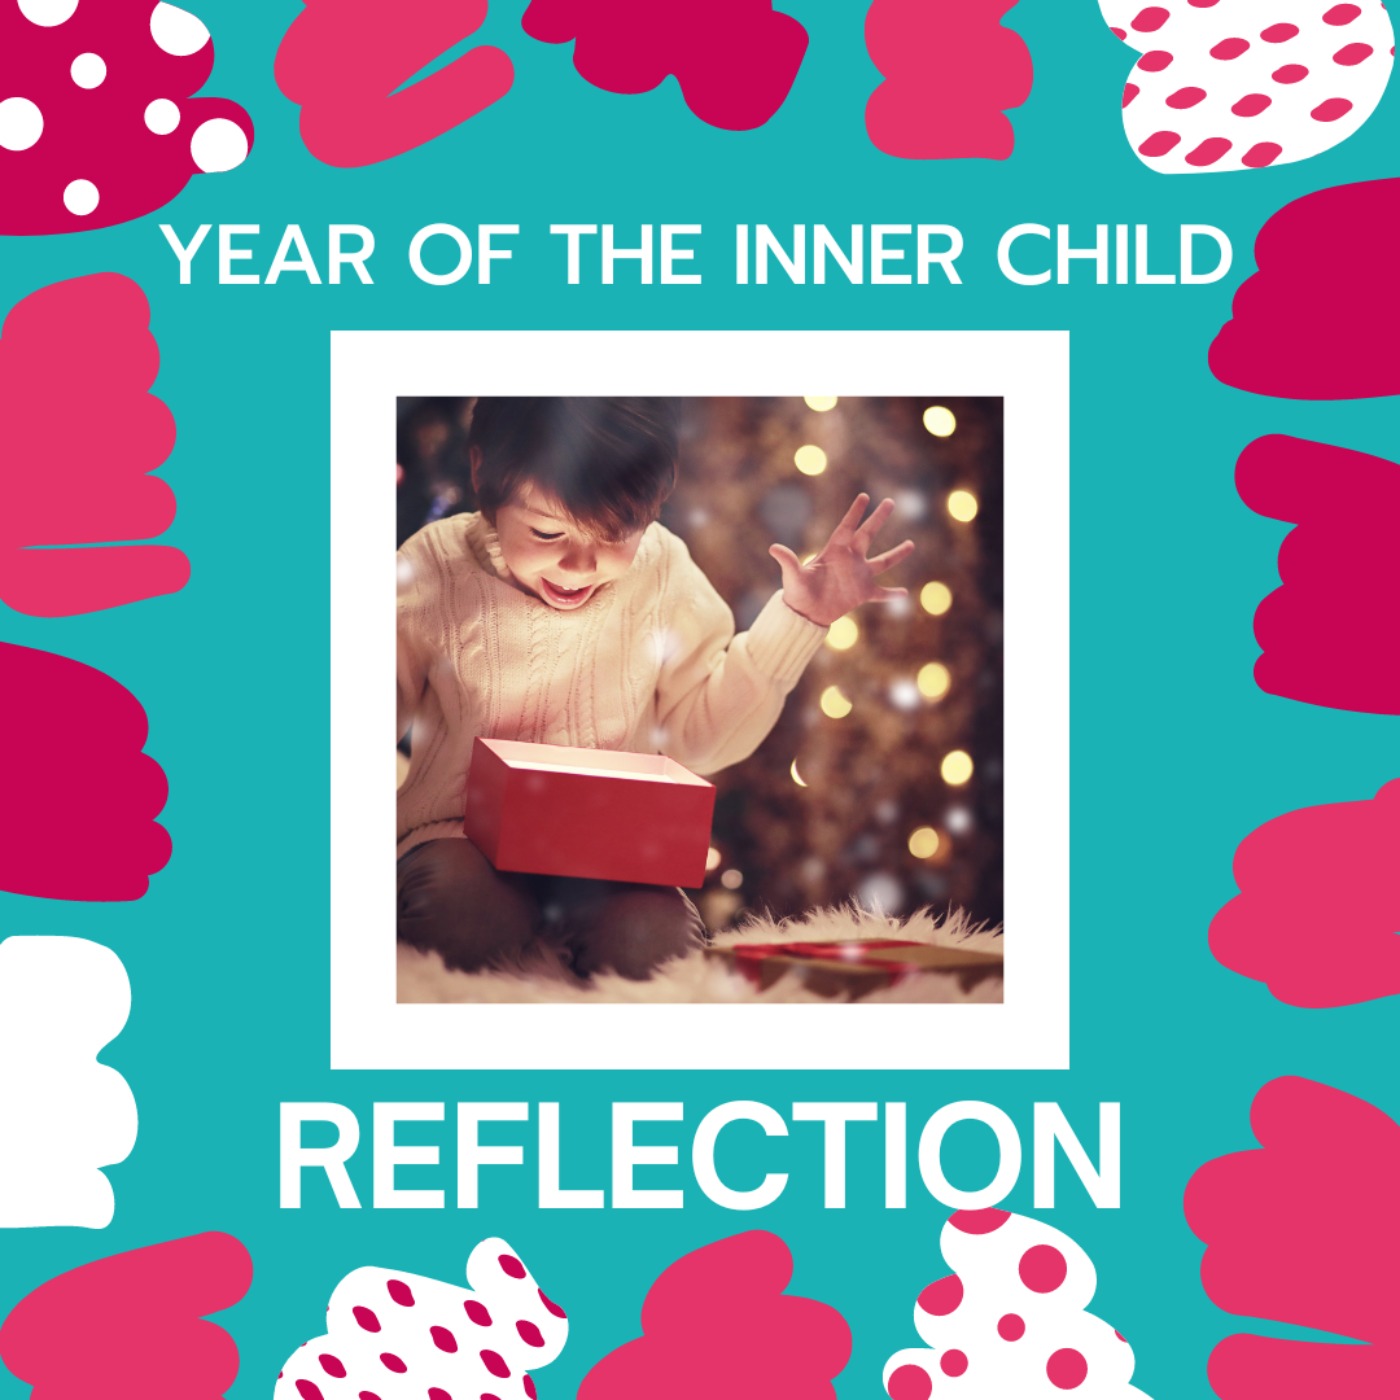 Year of the Inner Child: Reflection